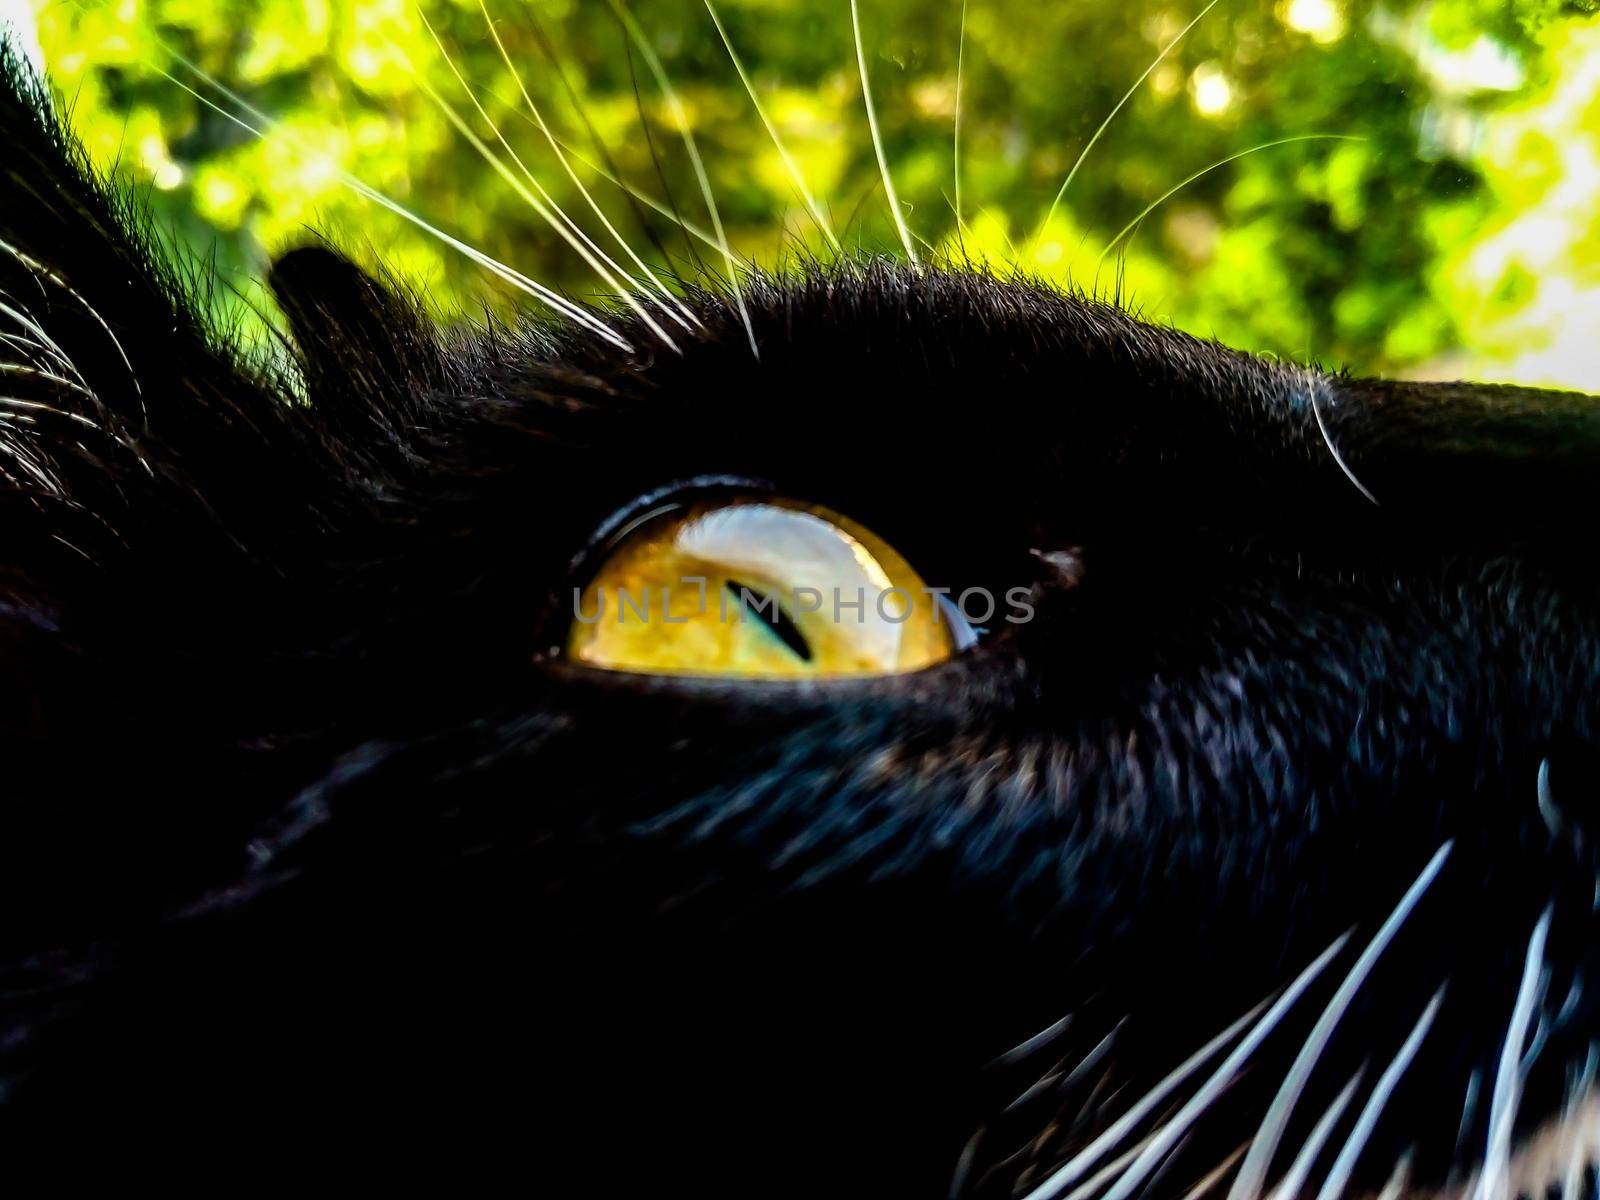 yellow eye of a black cat against a background of foliage by lapushka62